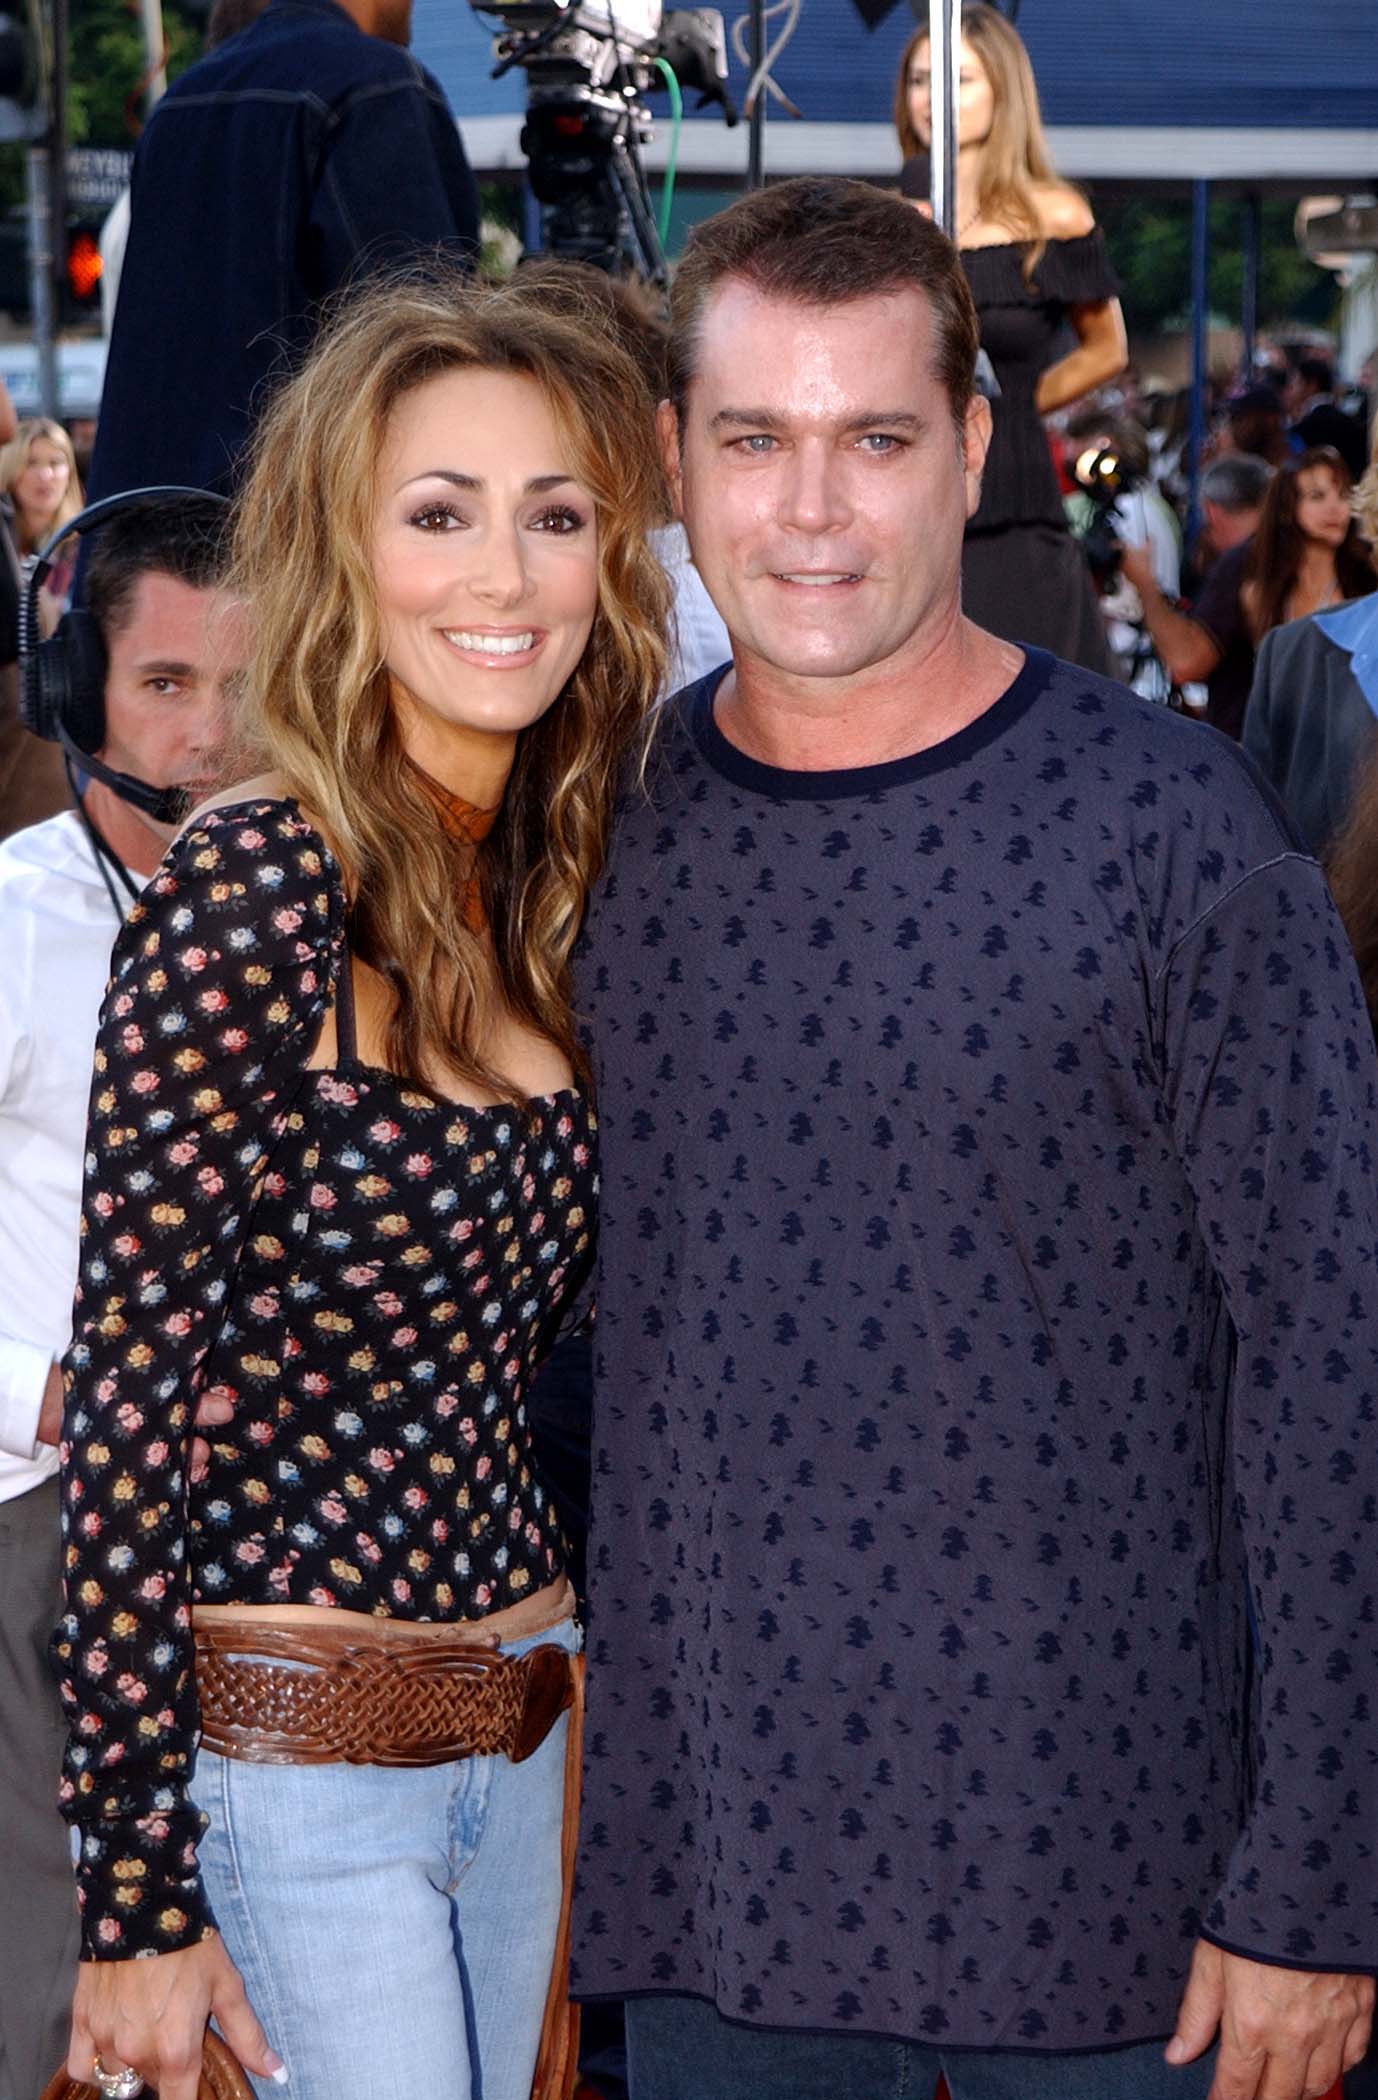 Michelle Grace and Ray Liotta during the "XXX" Los Angeles premiere on August 5, 2002, in Westwood, California, United States. | Source: Getty Images